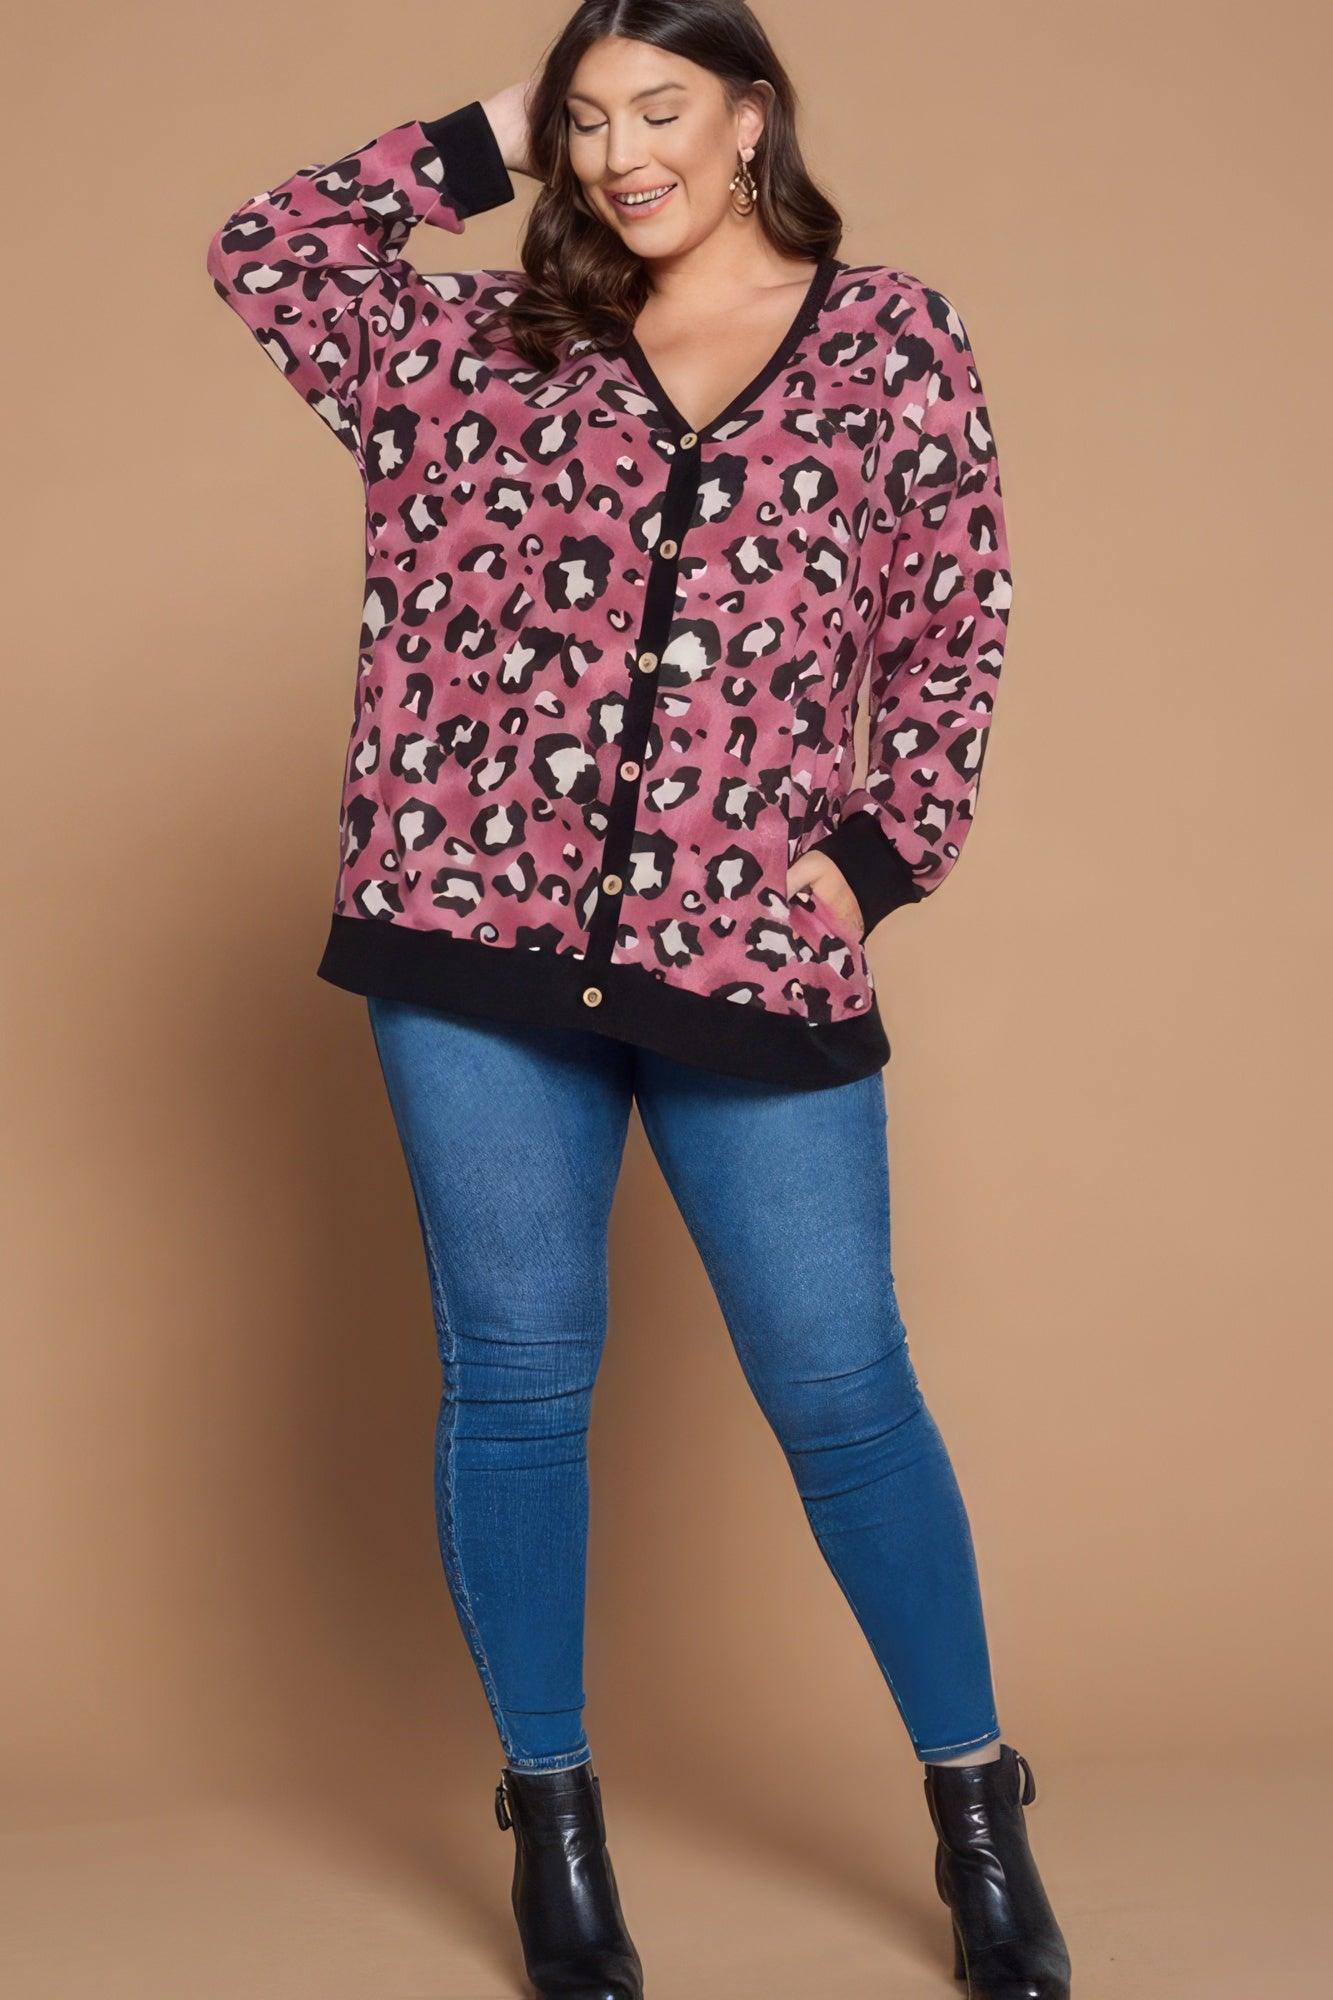 Women's Sweaters - Cardigans Plus Size Cozy Animal Mir Print With Brush Button Up Cardigan